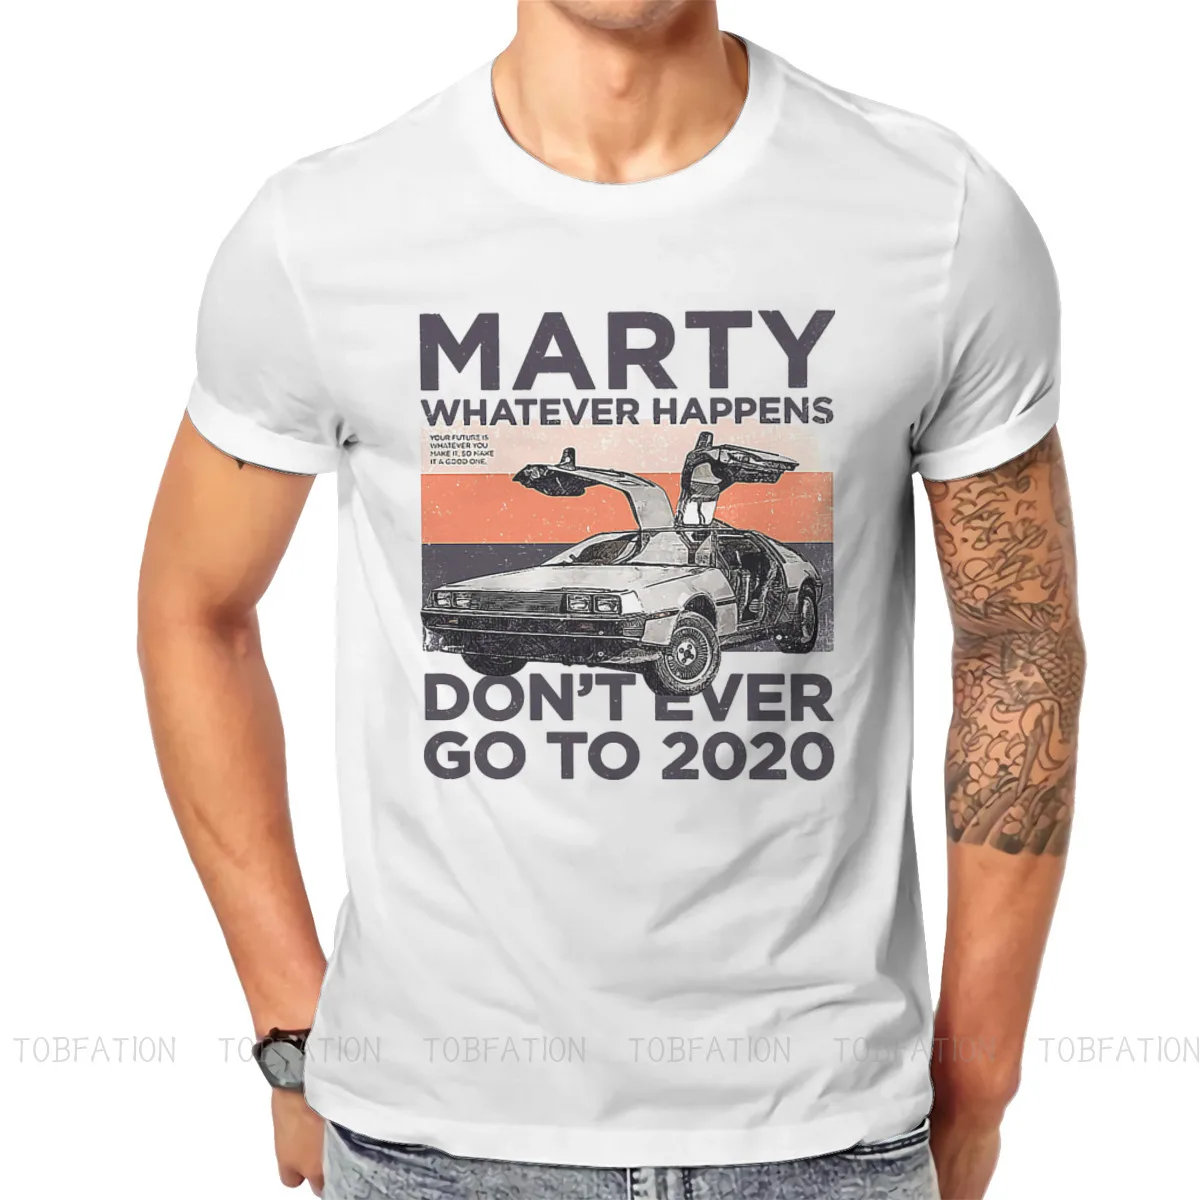 

Back to the Future Film Man TShirt Marty Whatever Happens Dont Ever Go To 2020 Fashion T Shirt Harajuku Sweatshirts Hipster